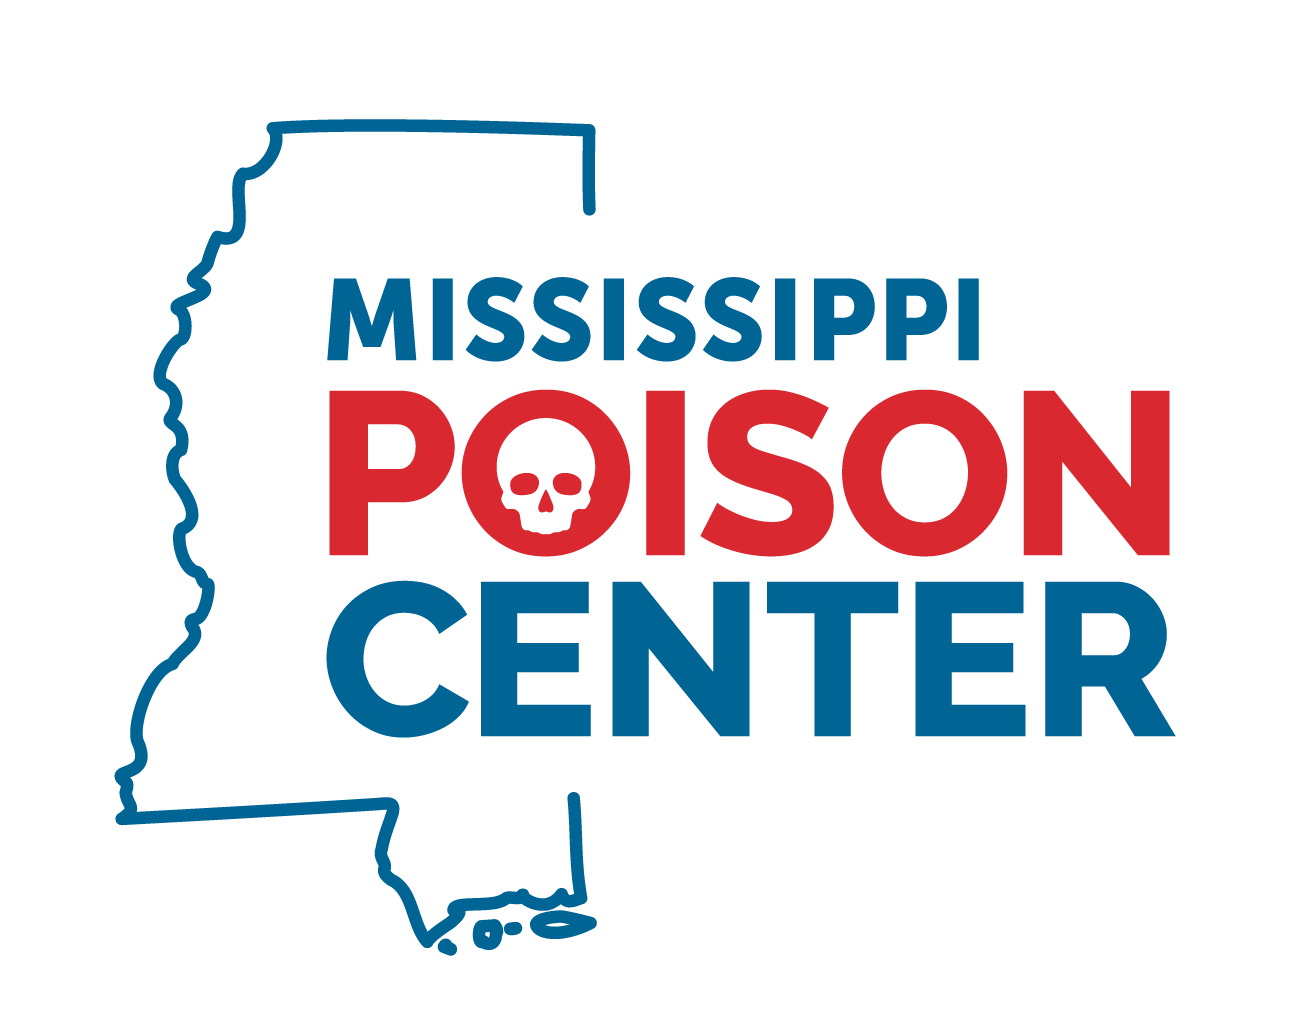 Mississippi Poison Control Center logo with outline of state of Mississippi and text of Mississippi Poison center.